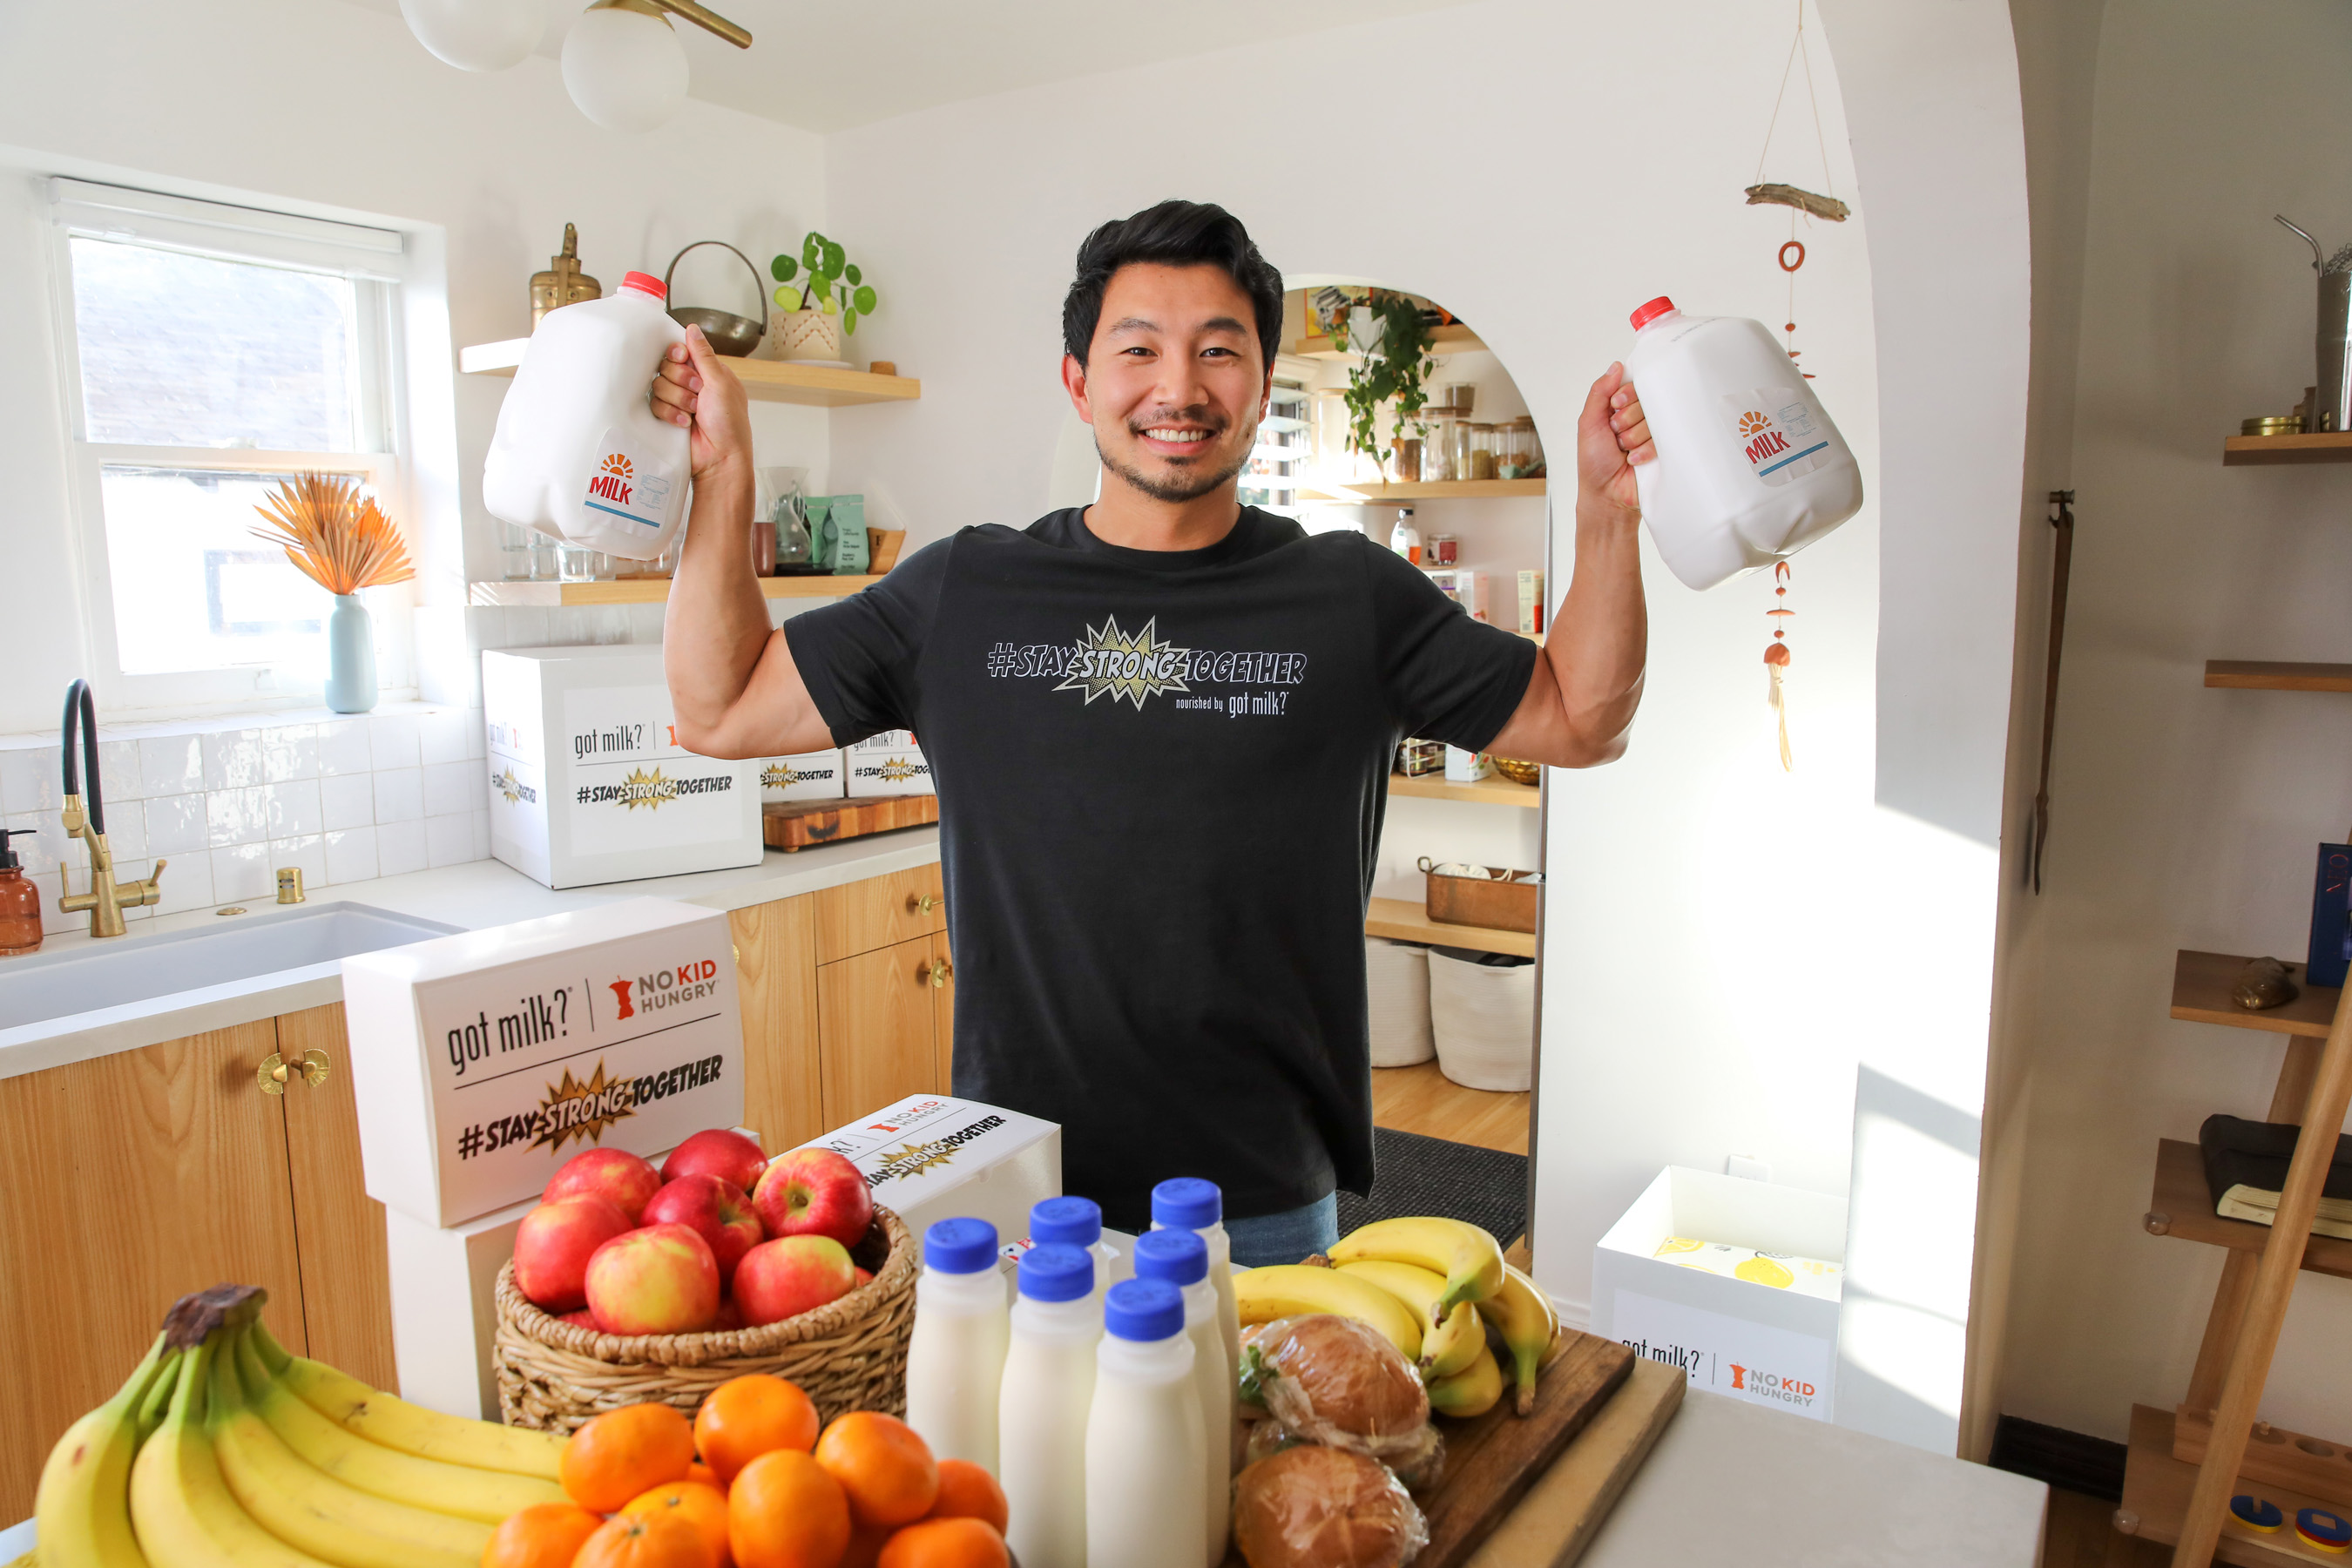 Marvel ‘Shang Chi’ Super Hero, Simu Liu, goes behind-the-scenes with the creators of ‘got milk?’ to demonstrates his own strength while inspiring others to give back. The #StayStrongTogether social media challenge marks a partnership between between California Milk Processor Board and No Kid Hungry to help provide up to 1 million meals to school feeding programs throughout the Golden State. (Photo by Rachel Murray Framingheddu for CMPB/Getty Images).